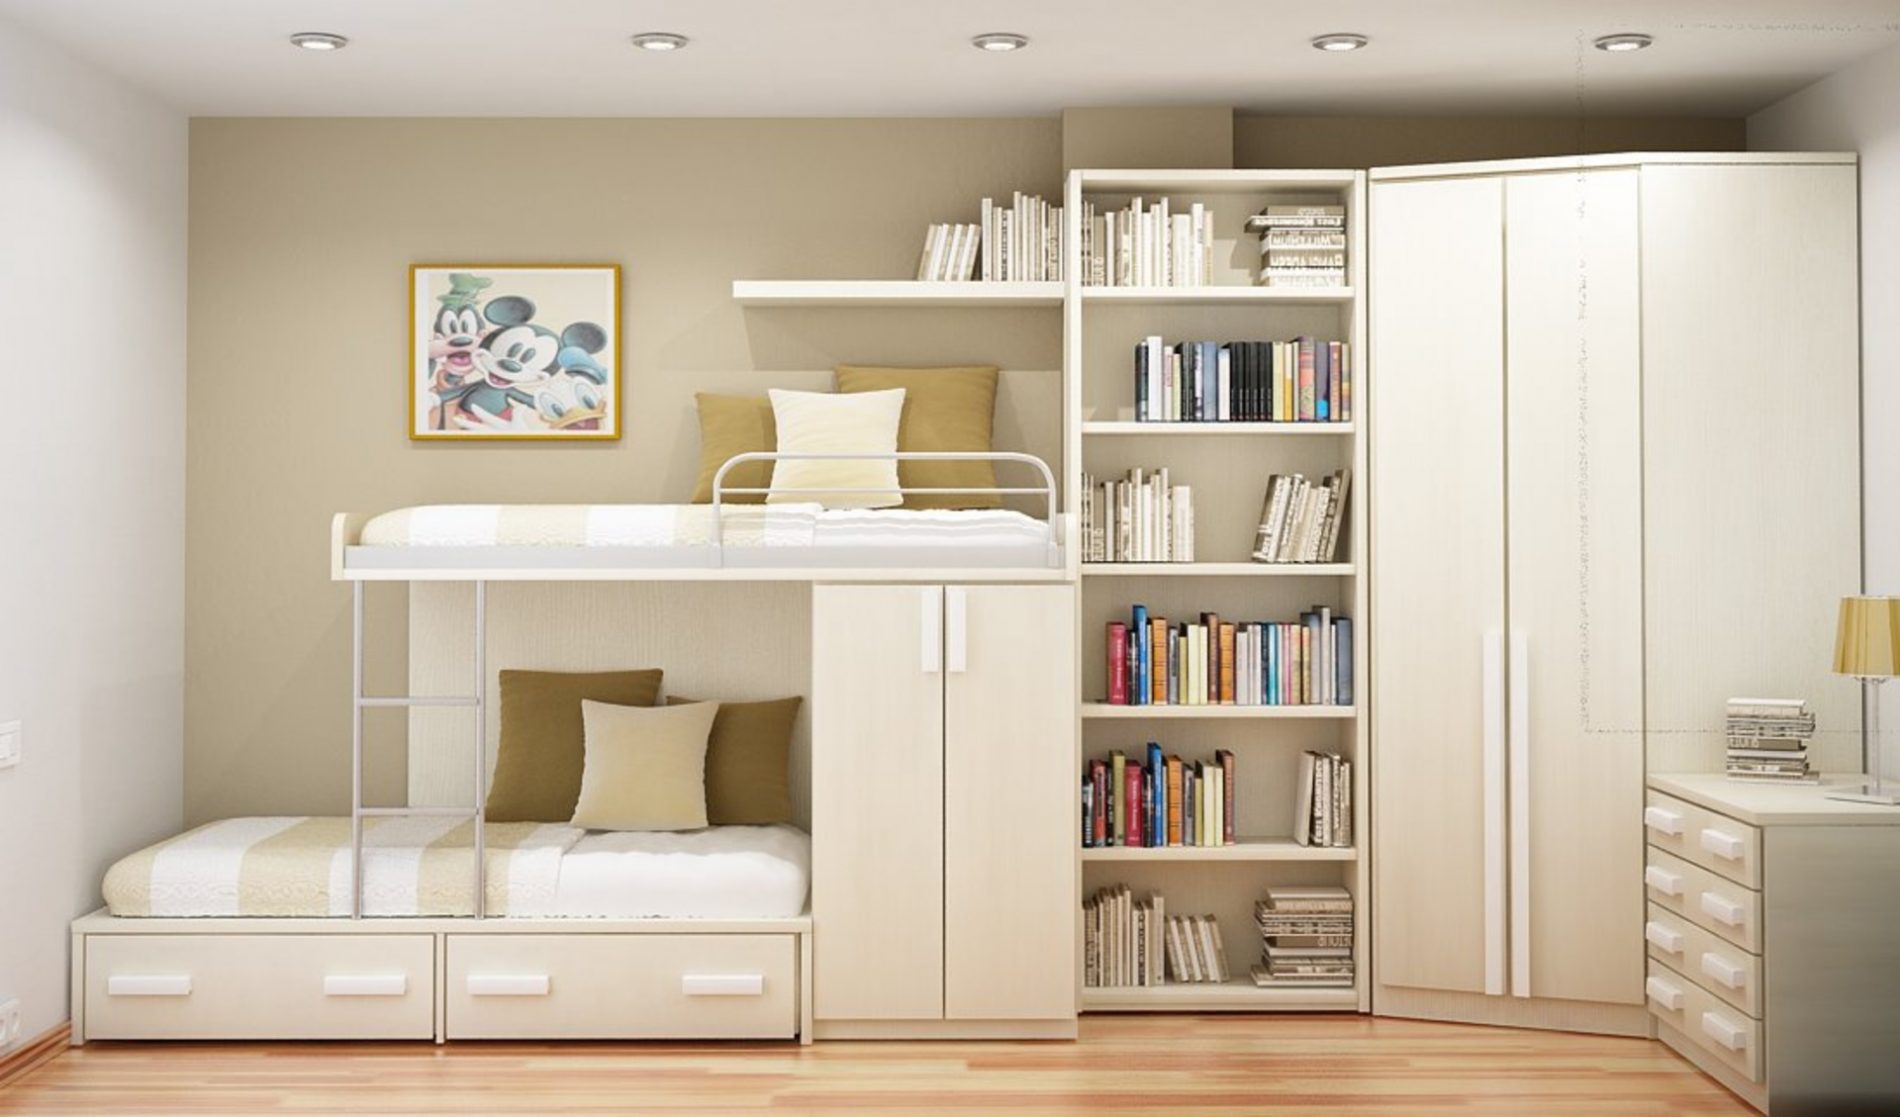 Choosing Beds With Storage To Maximize Space